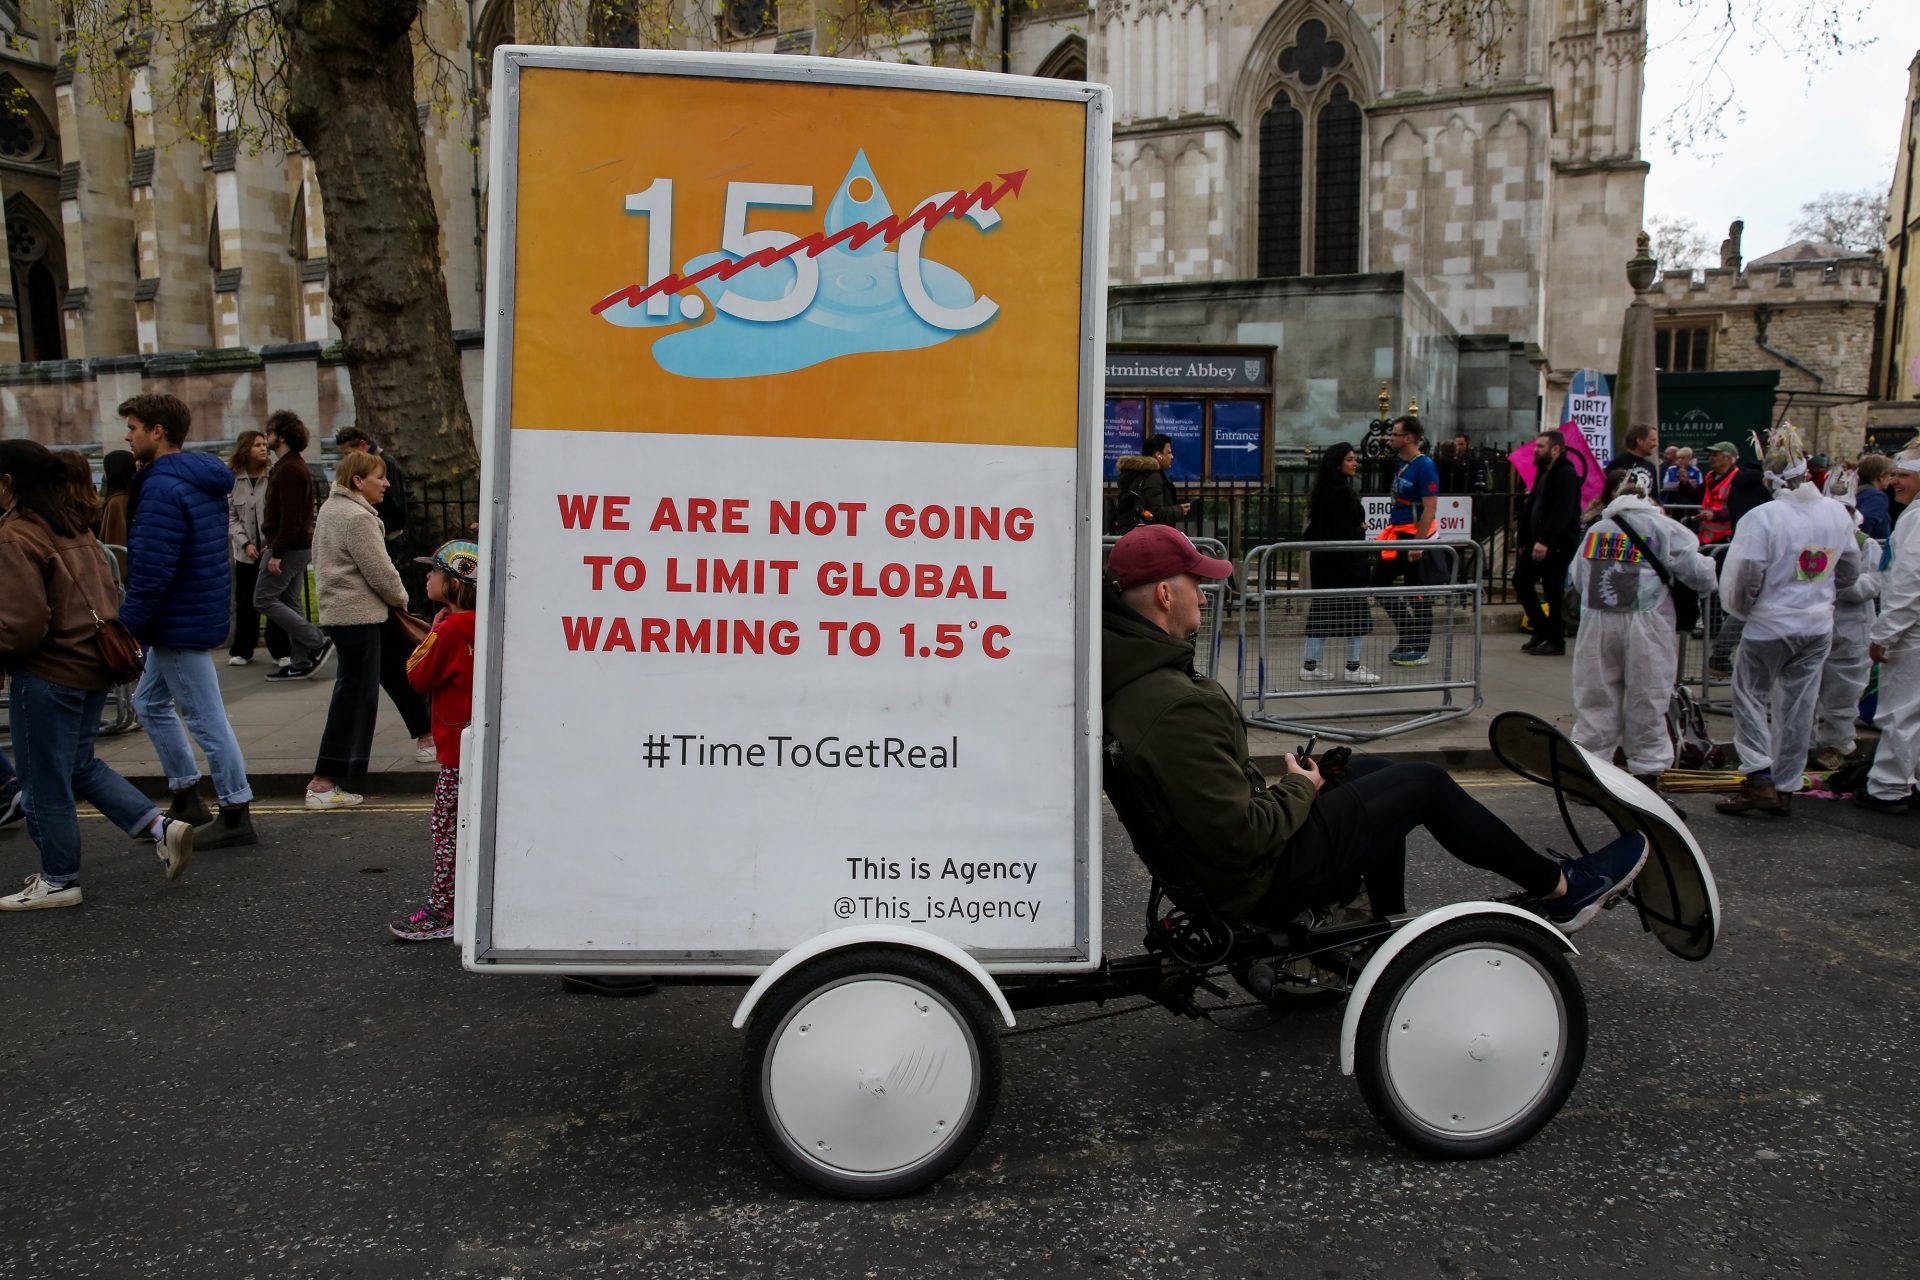 Dangerously close to our 1.5ºC global warming limit